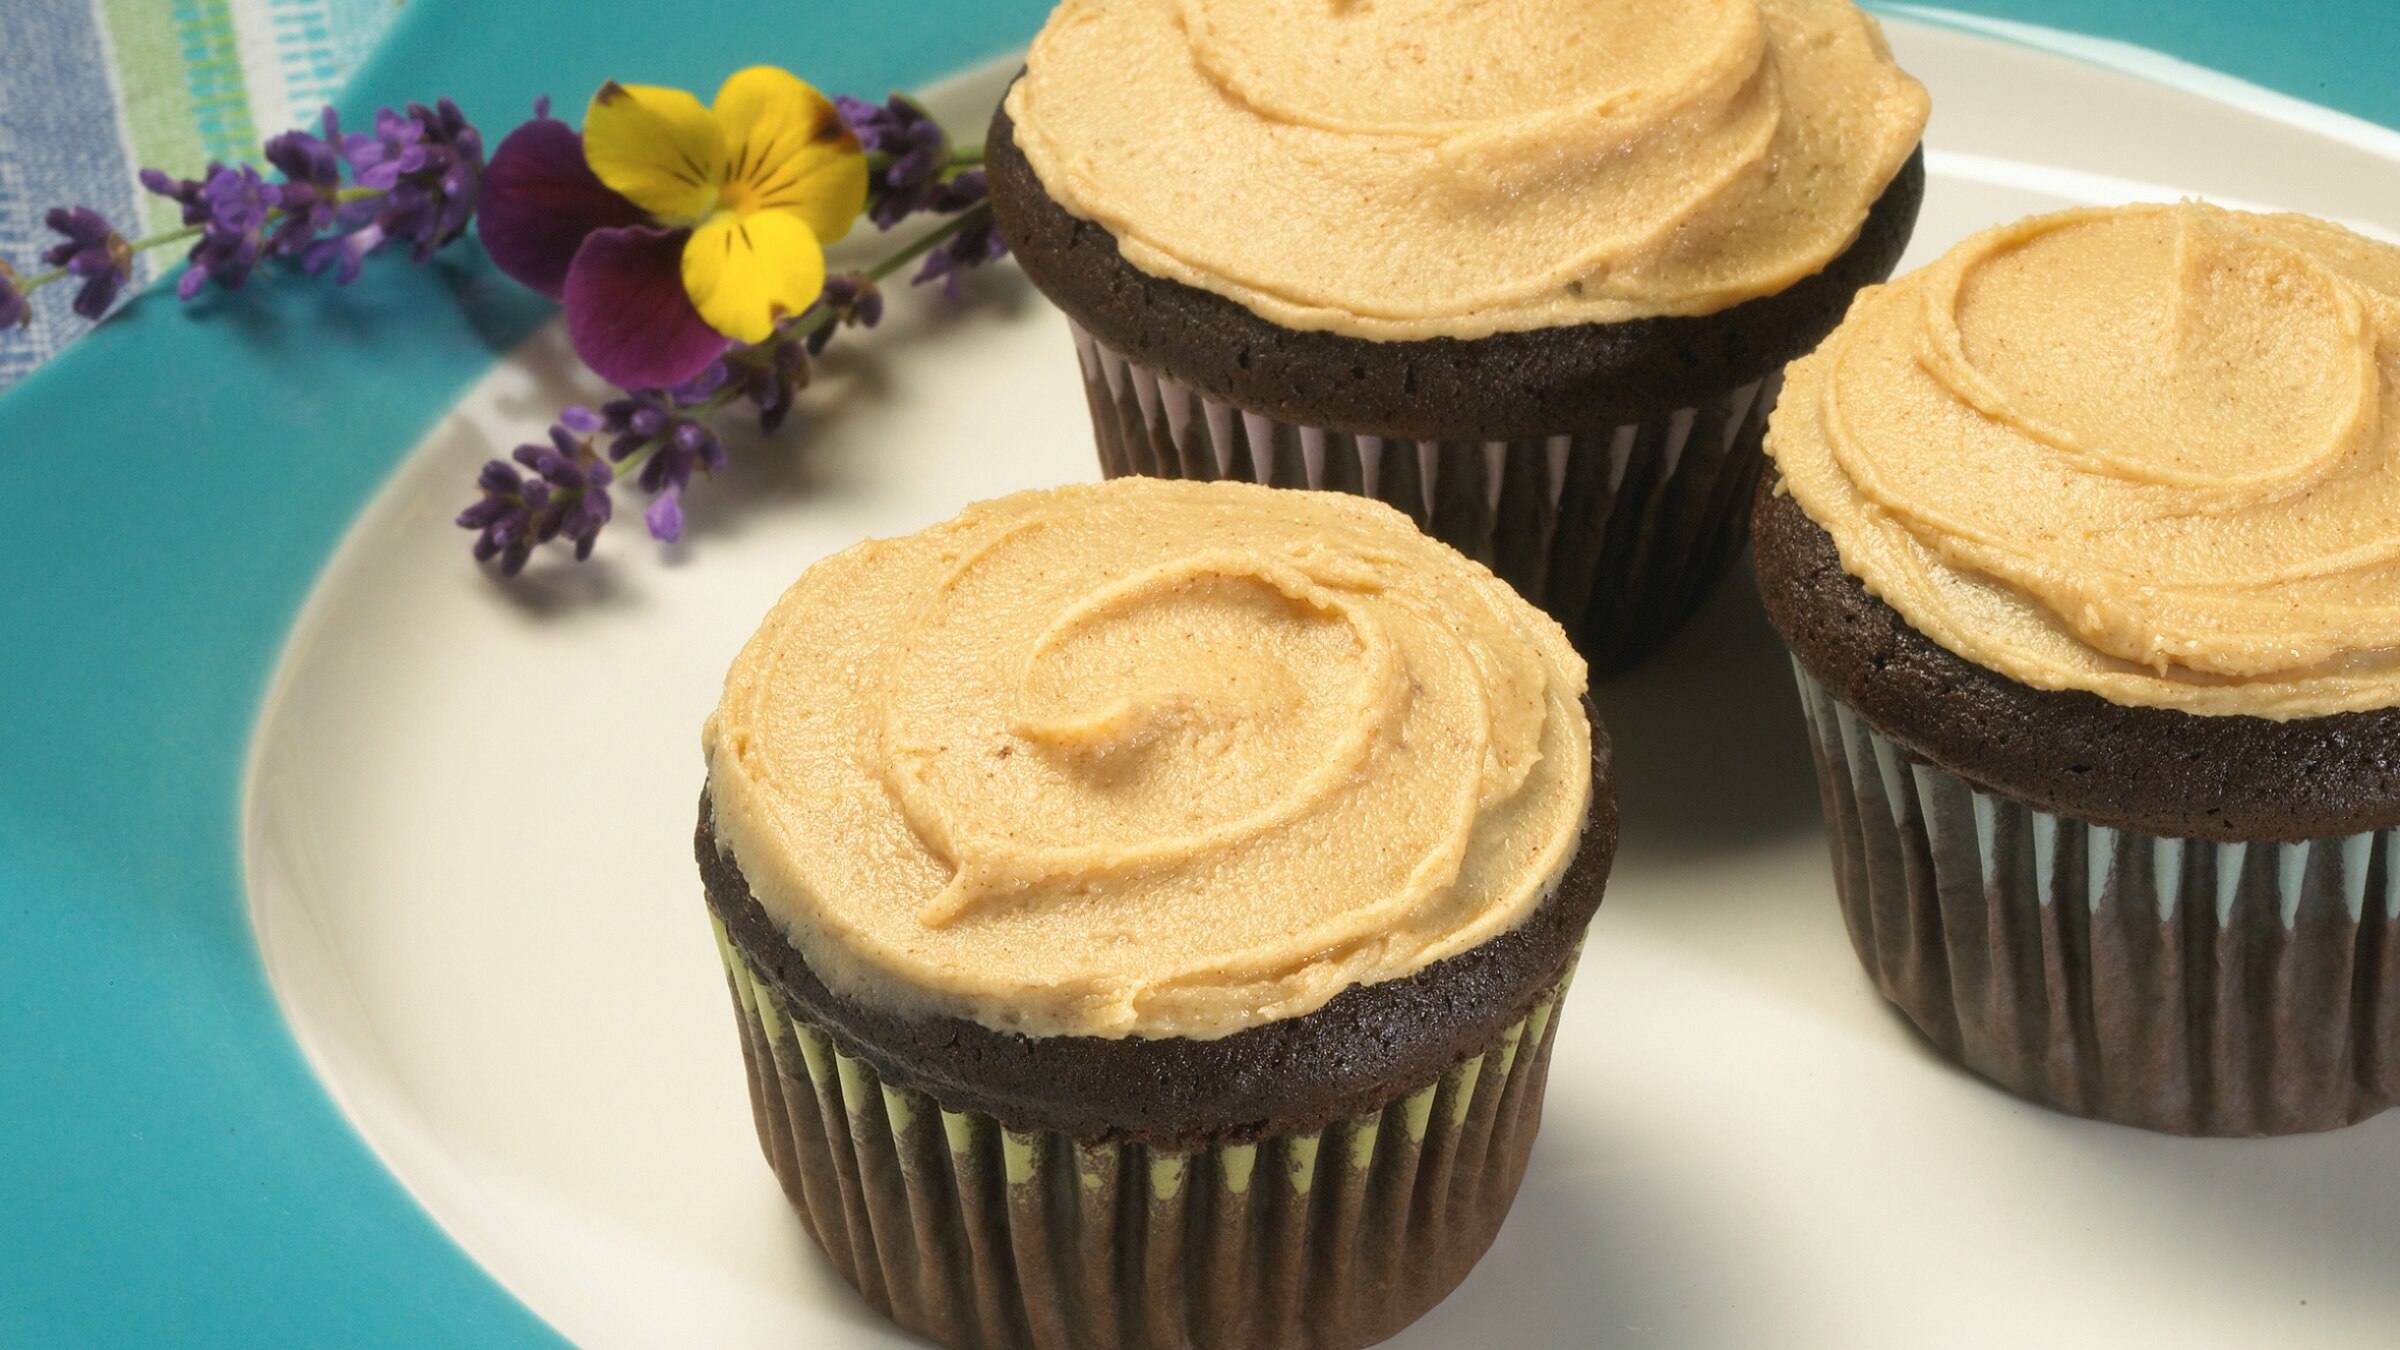 Chocolate Cinnamon Cupcakes with Peanut Butter Cinnamon Frosting